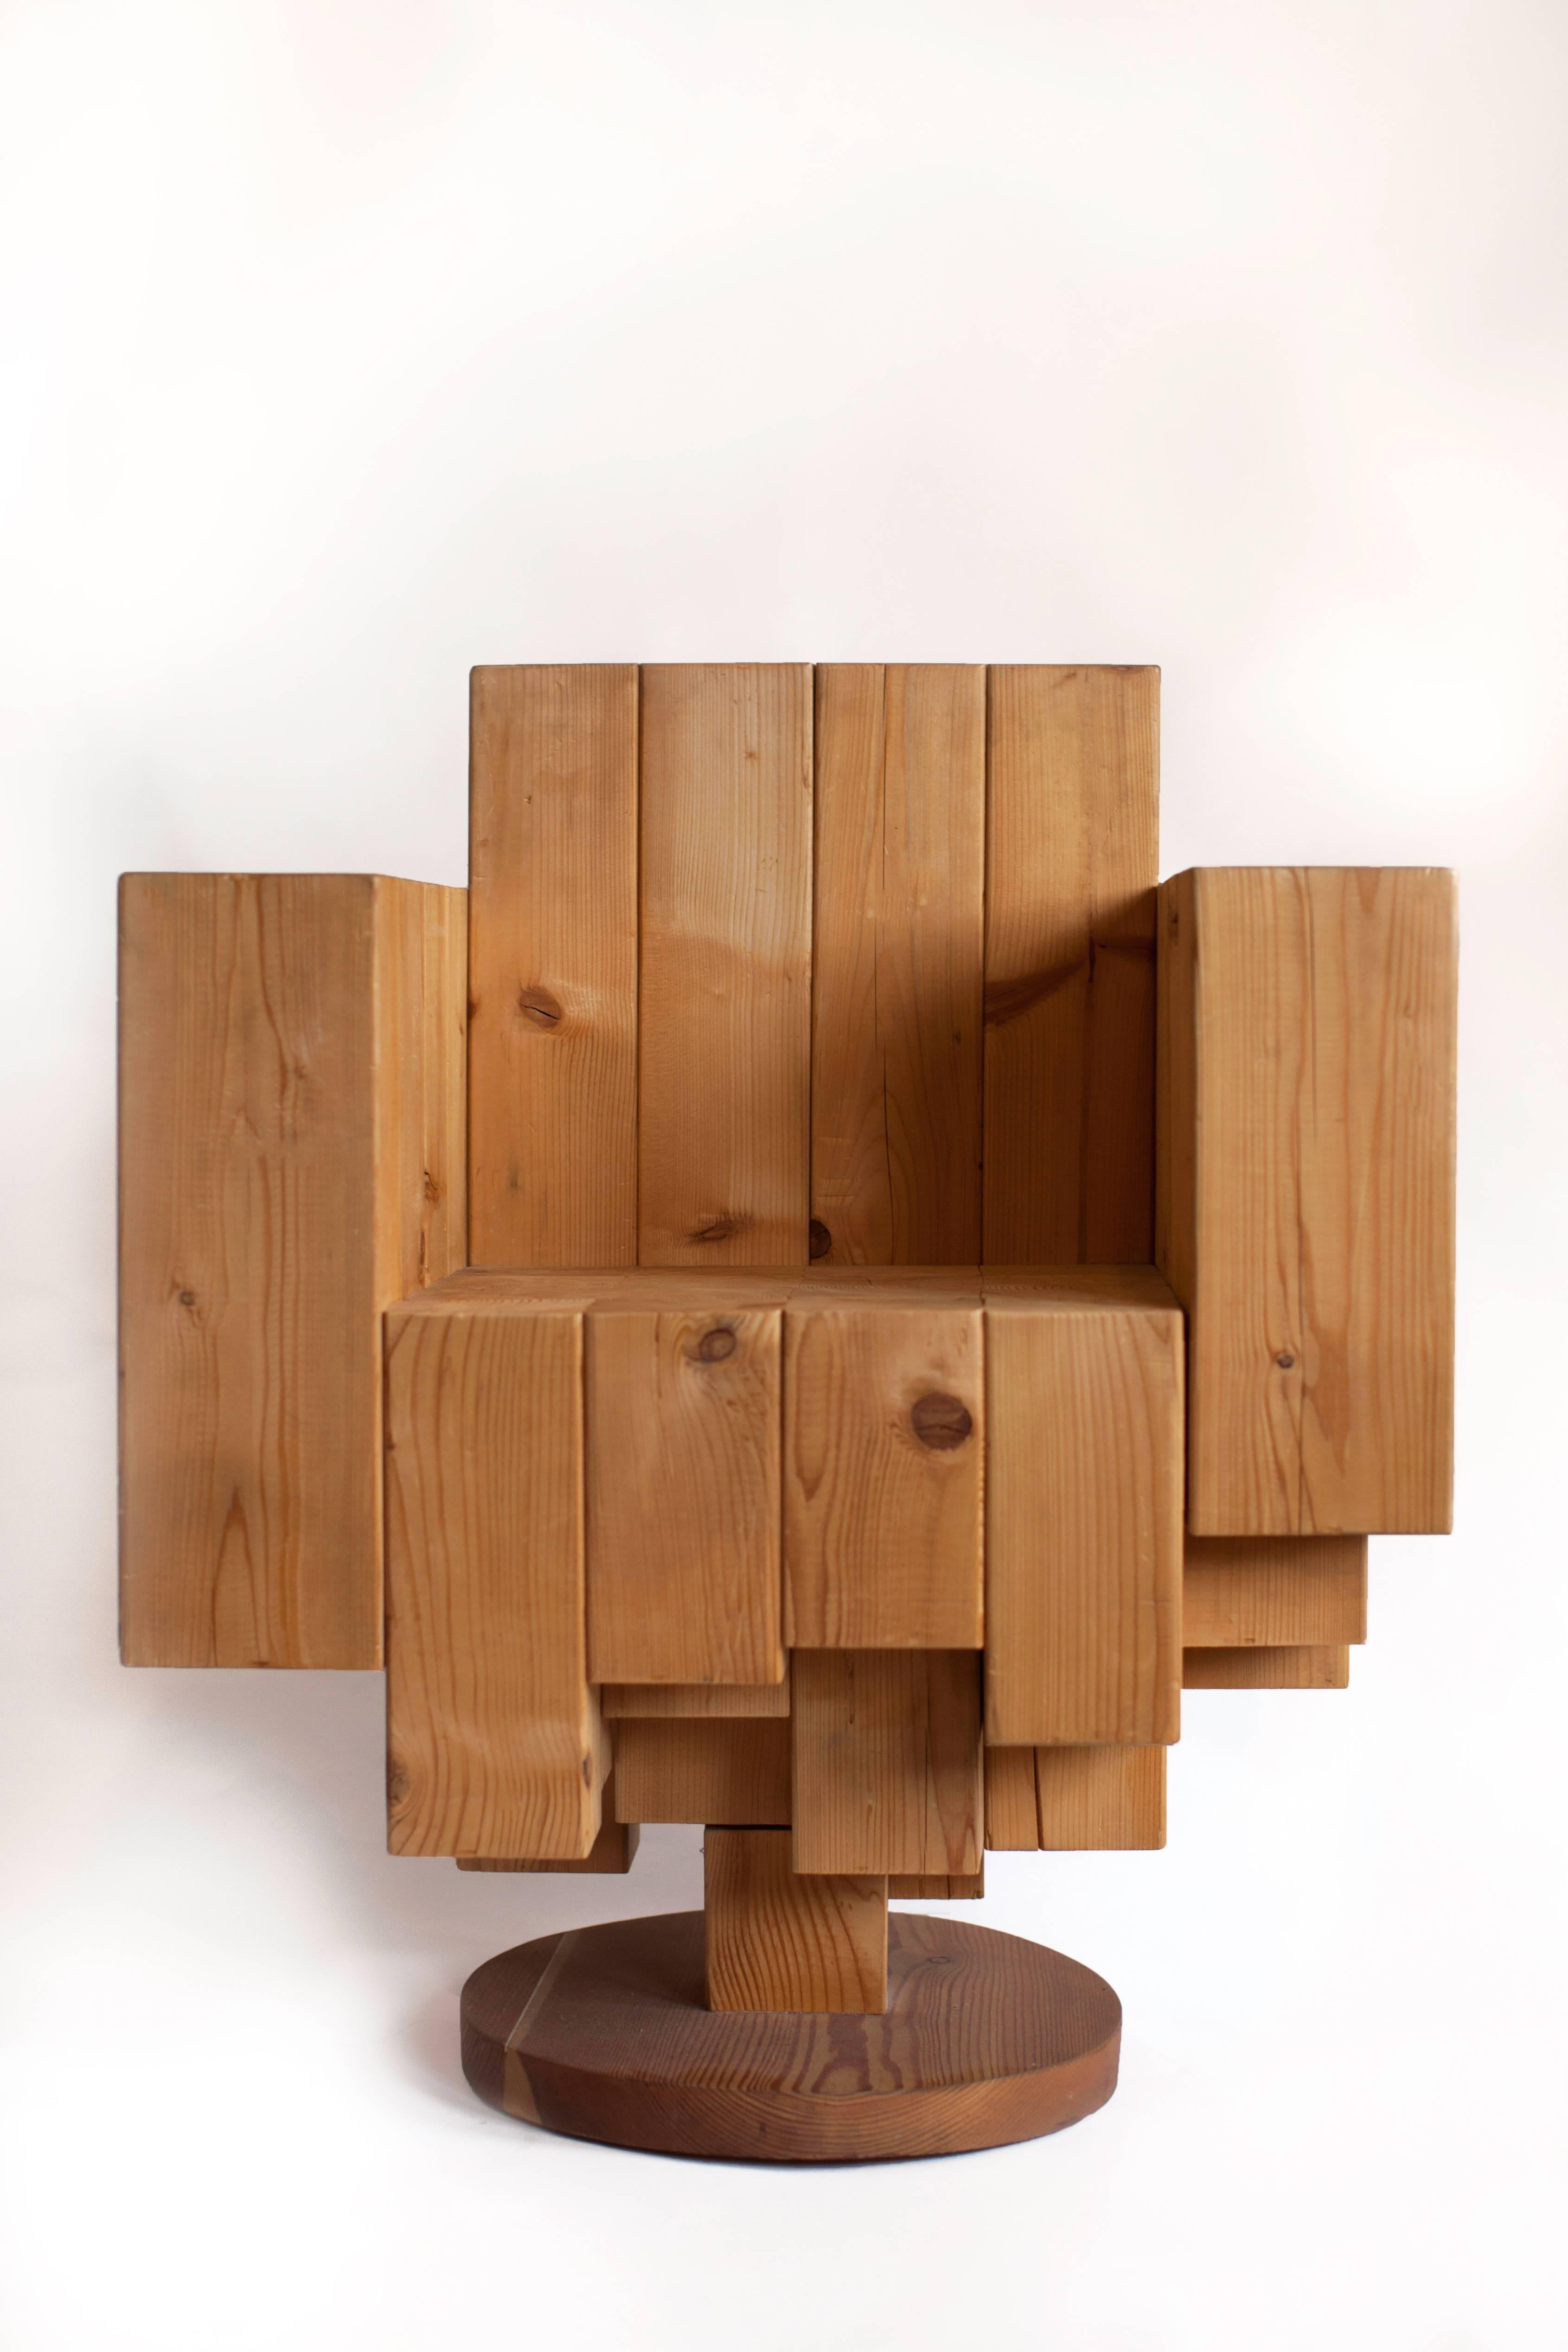 Giorgio Mariani (b. 1966)

A beautiful, sculptural Cubist armchair in massive asymmetrical blocks of pine with contrasting circular patterns of wood grain at the seat. This stunning and unique piece by woodworker Giorgio Mariani is as much art as it